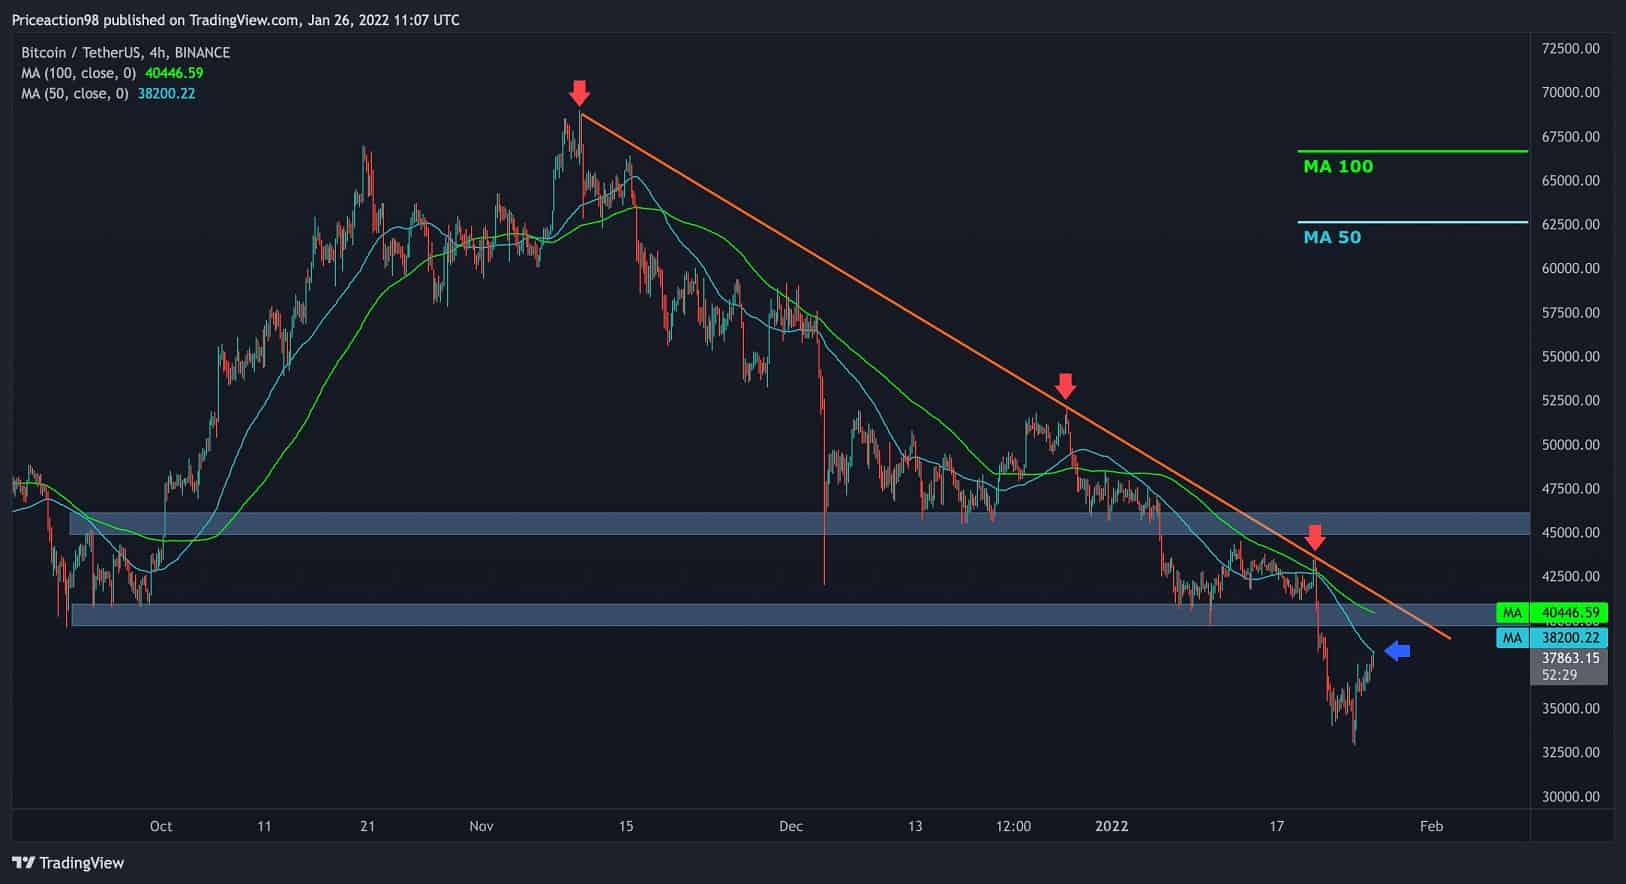 Technical Analysis; 4H time frame